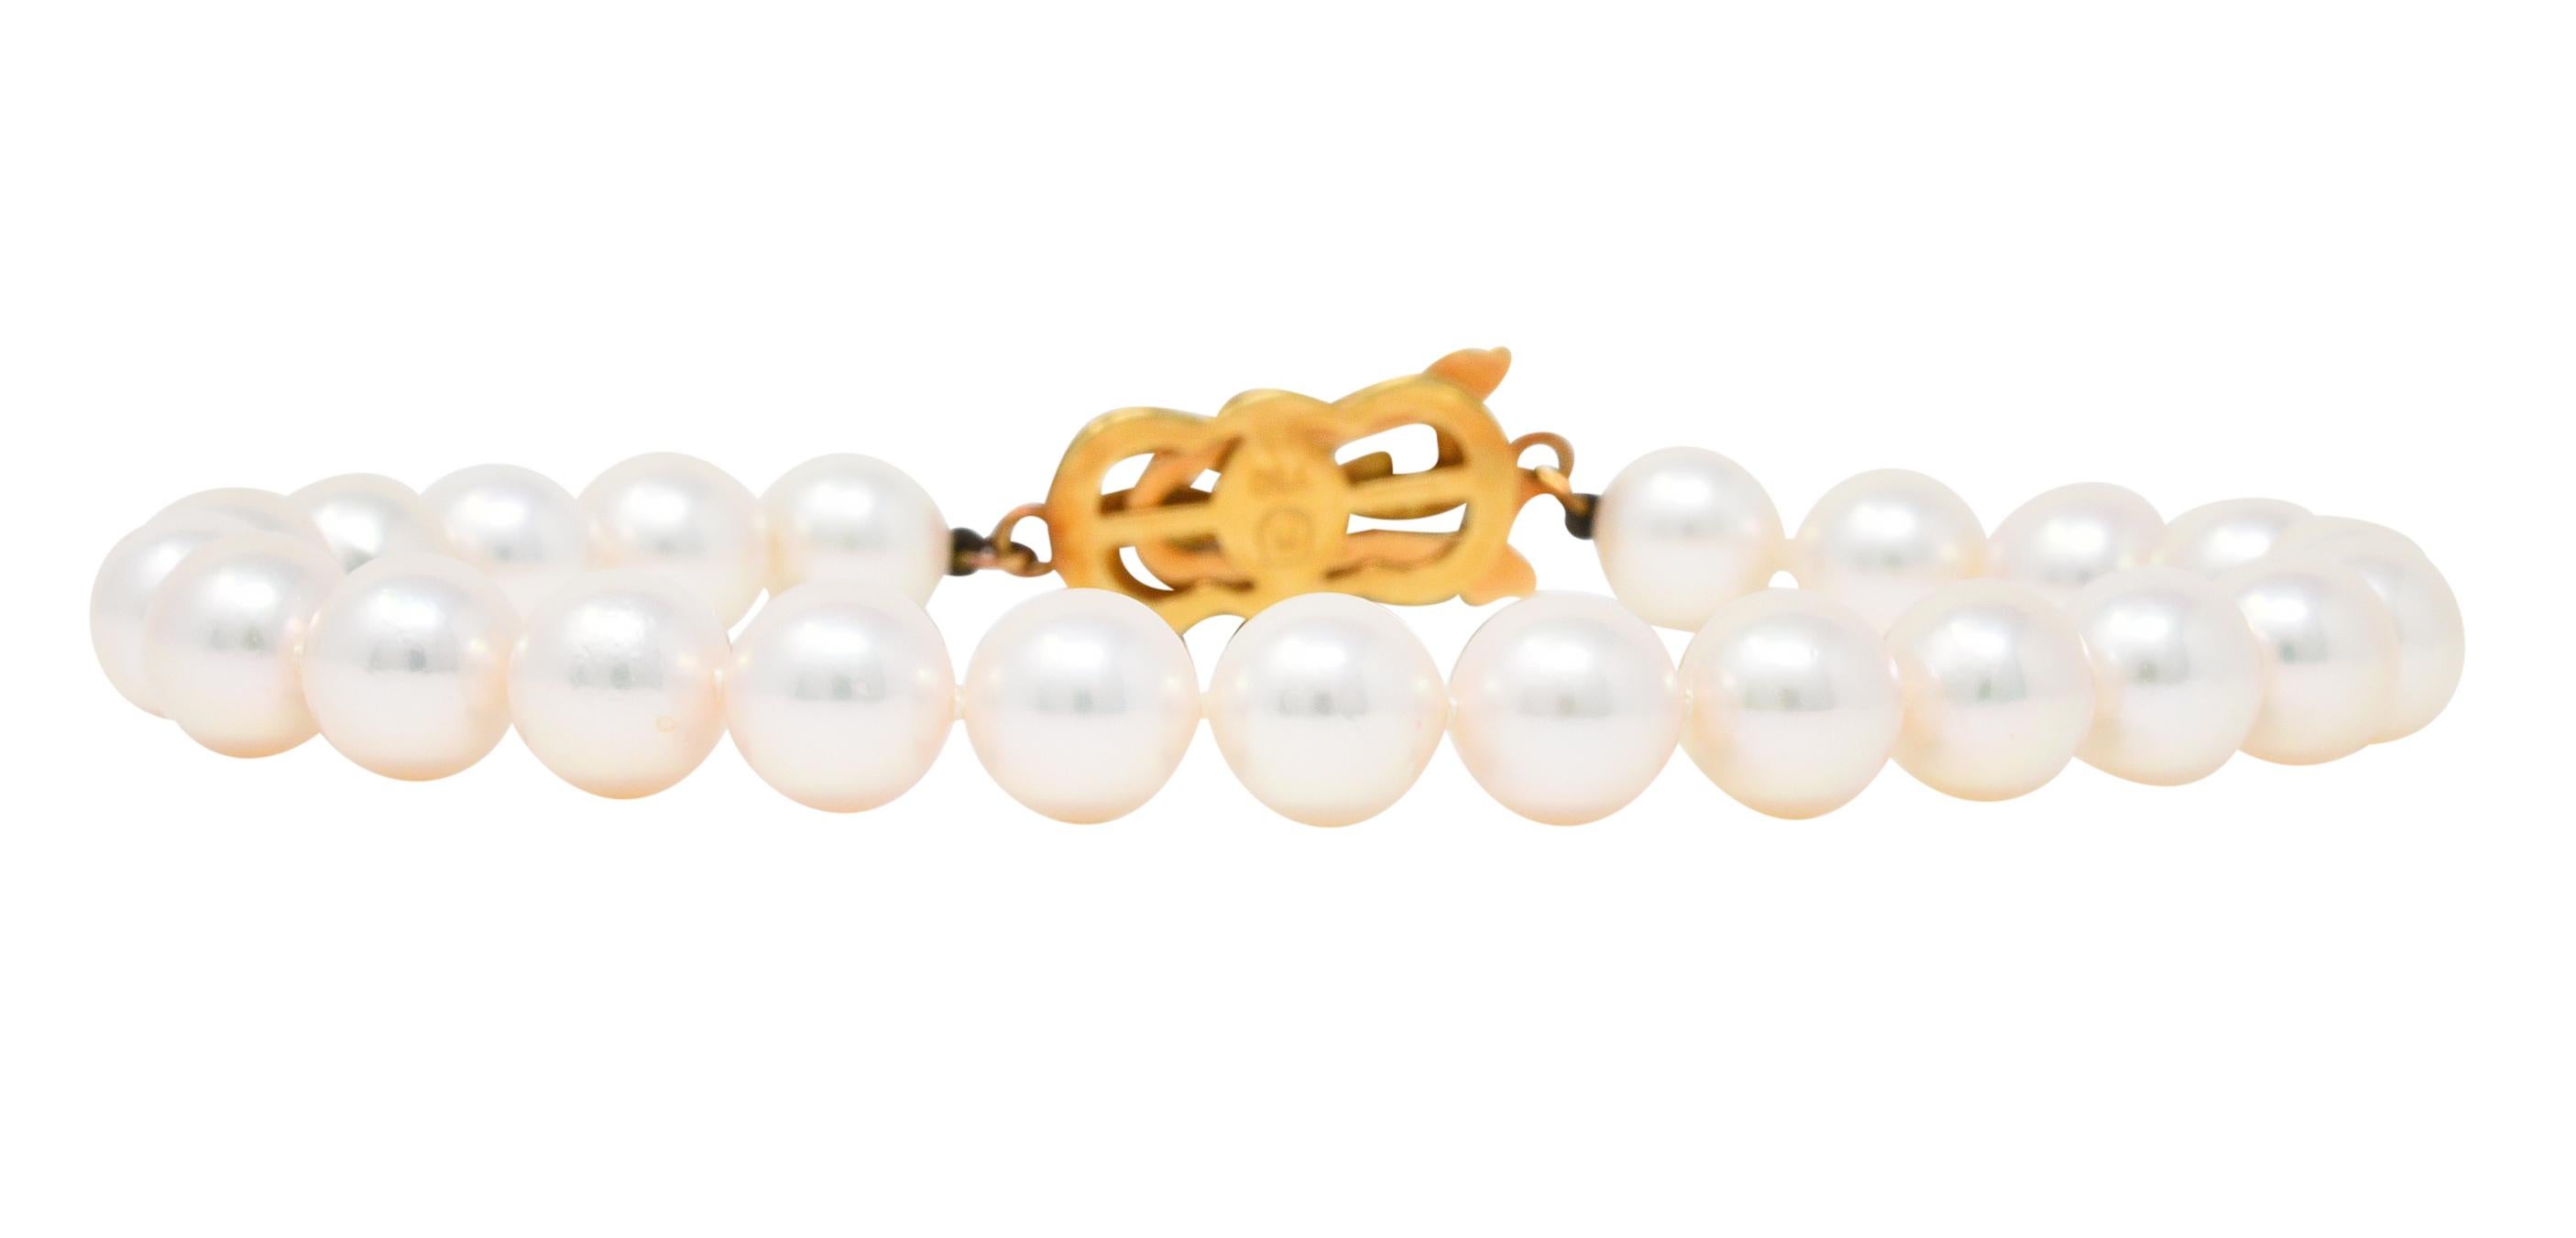 Strand bracelet is hand-knotted and comprised of 7.0 mm round pearls

Well matched in white body color with strong rosè overtones and excellent luster

Completes as an 18 karat gold pearl clasp - deeply engraved, forming a knot motif

Accented by a